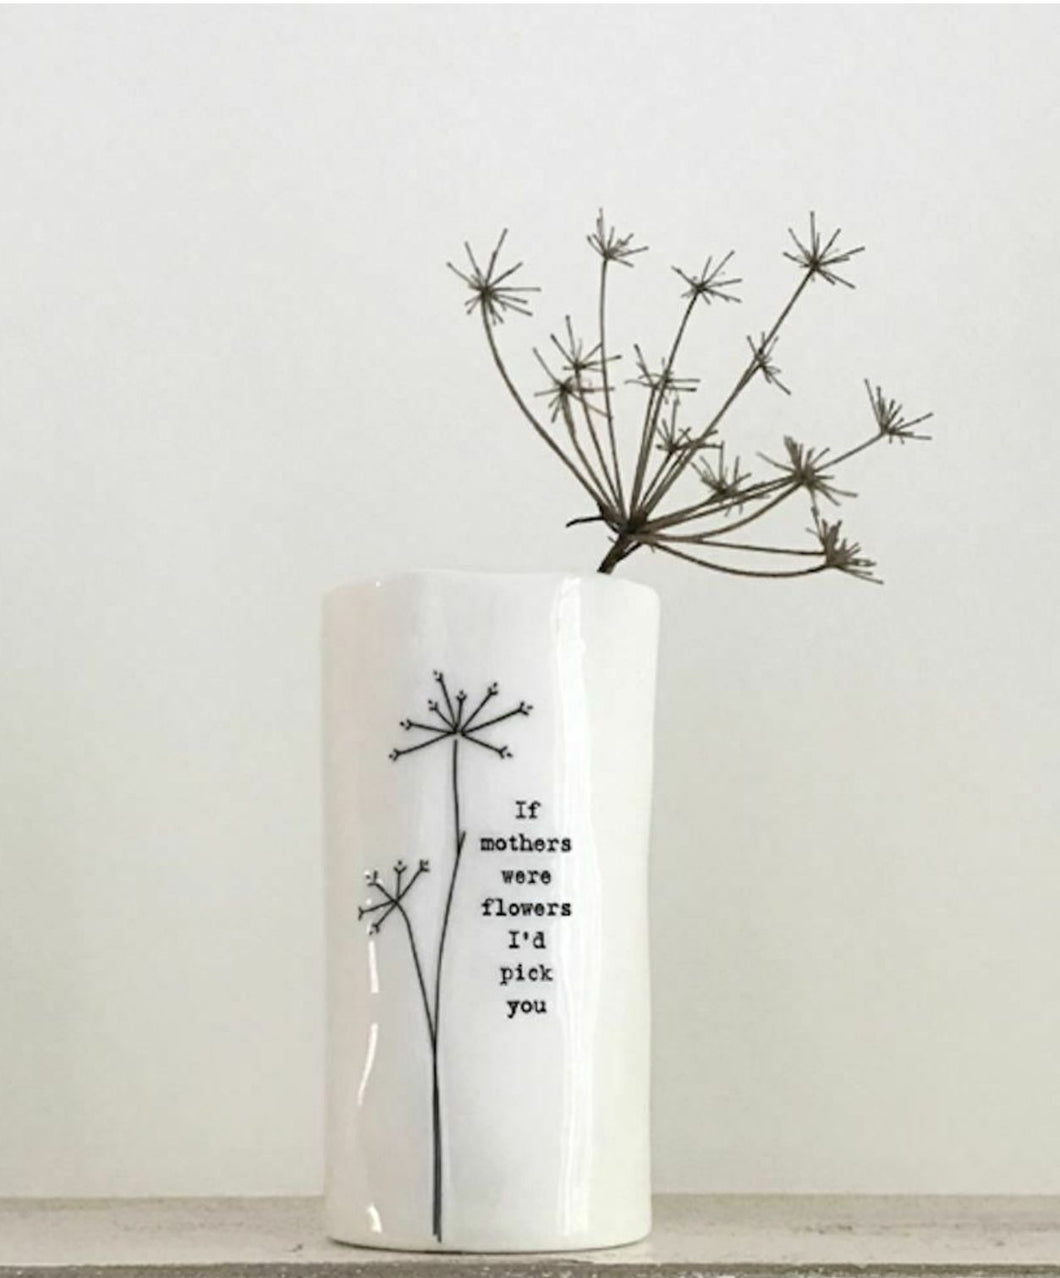 Small porcelain vase-If mothers were flowers